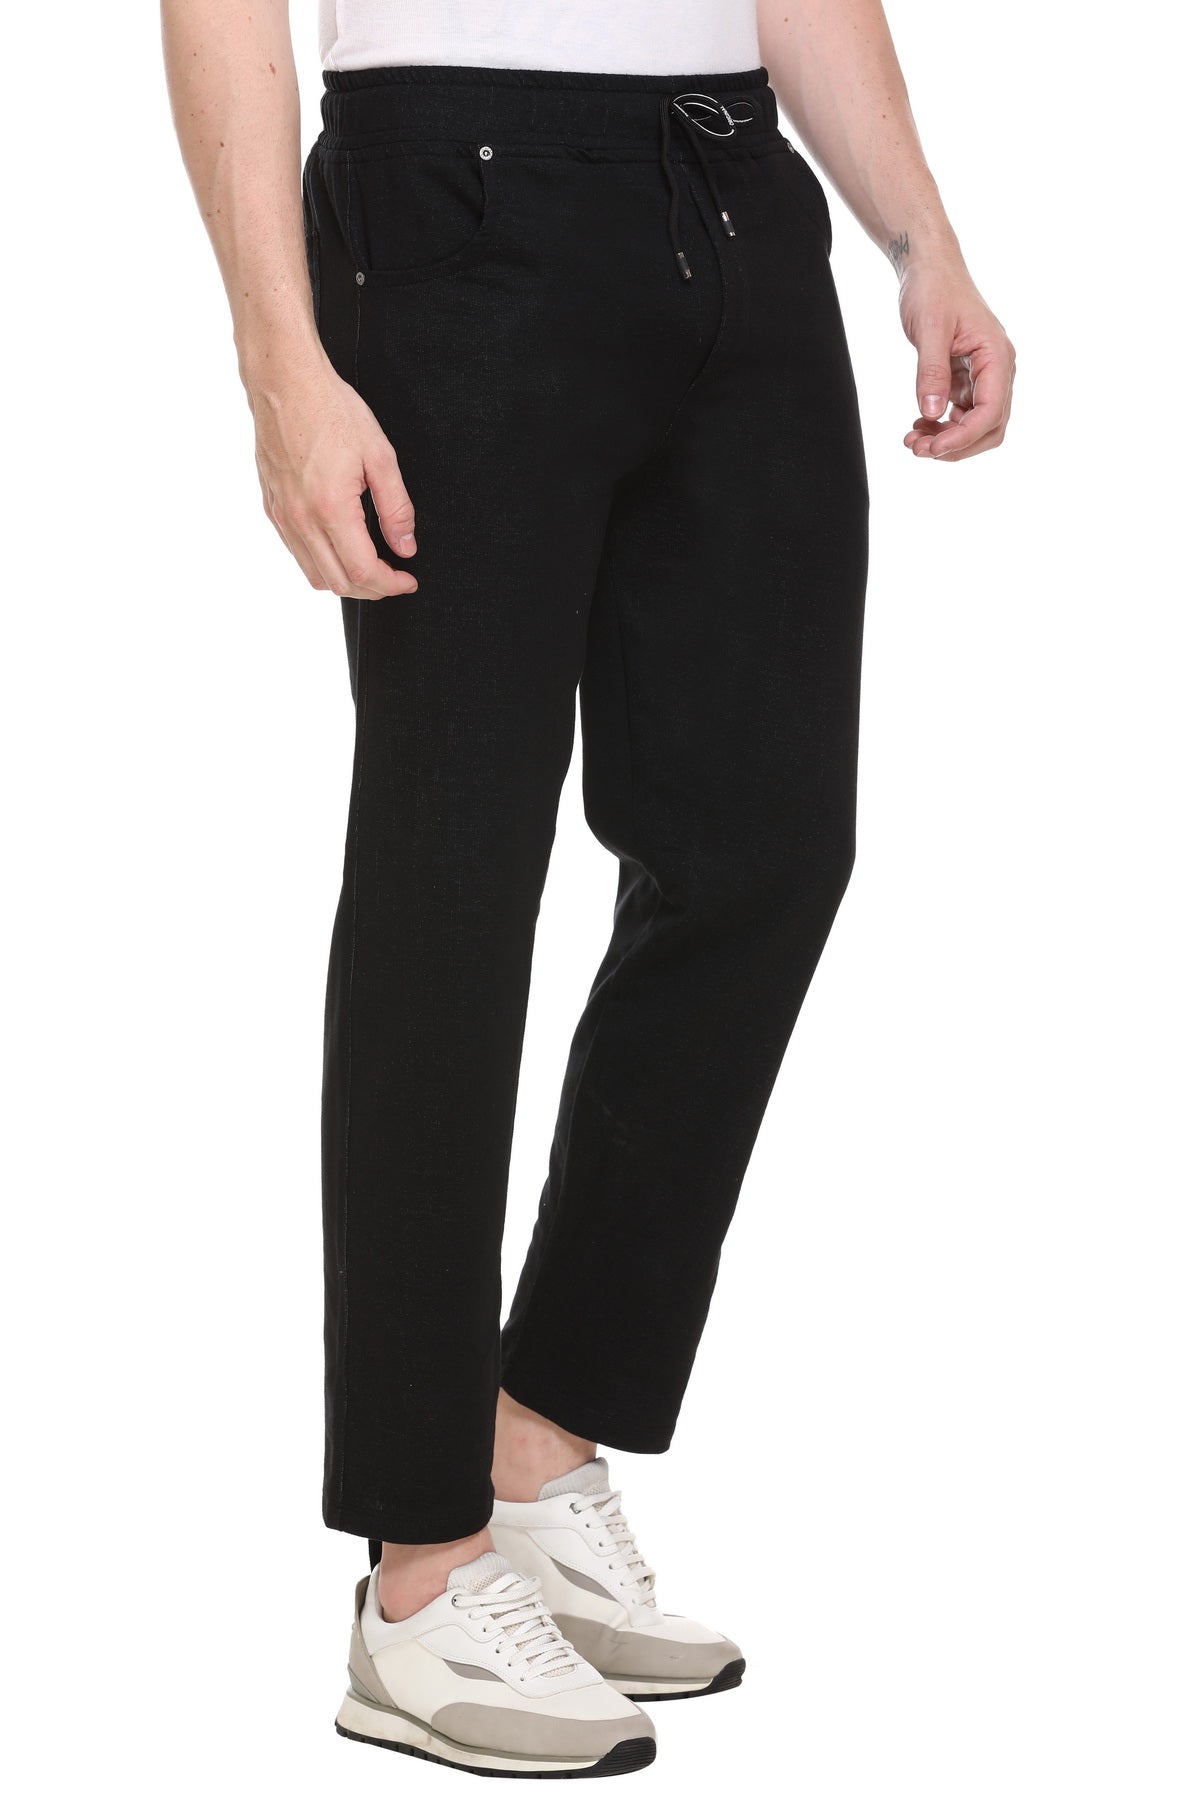 Sports trousers by stefano ricci  shop online